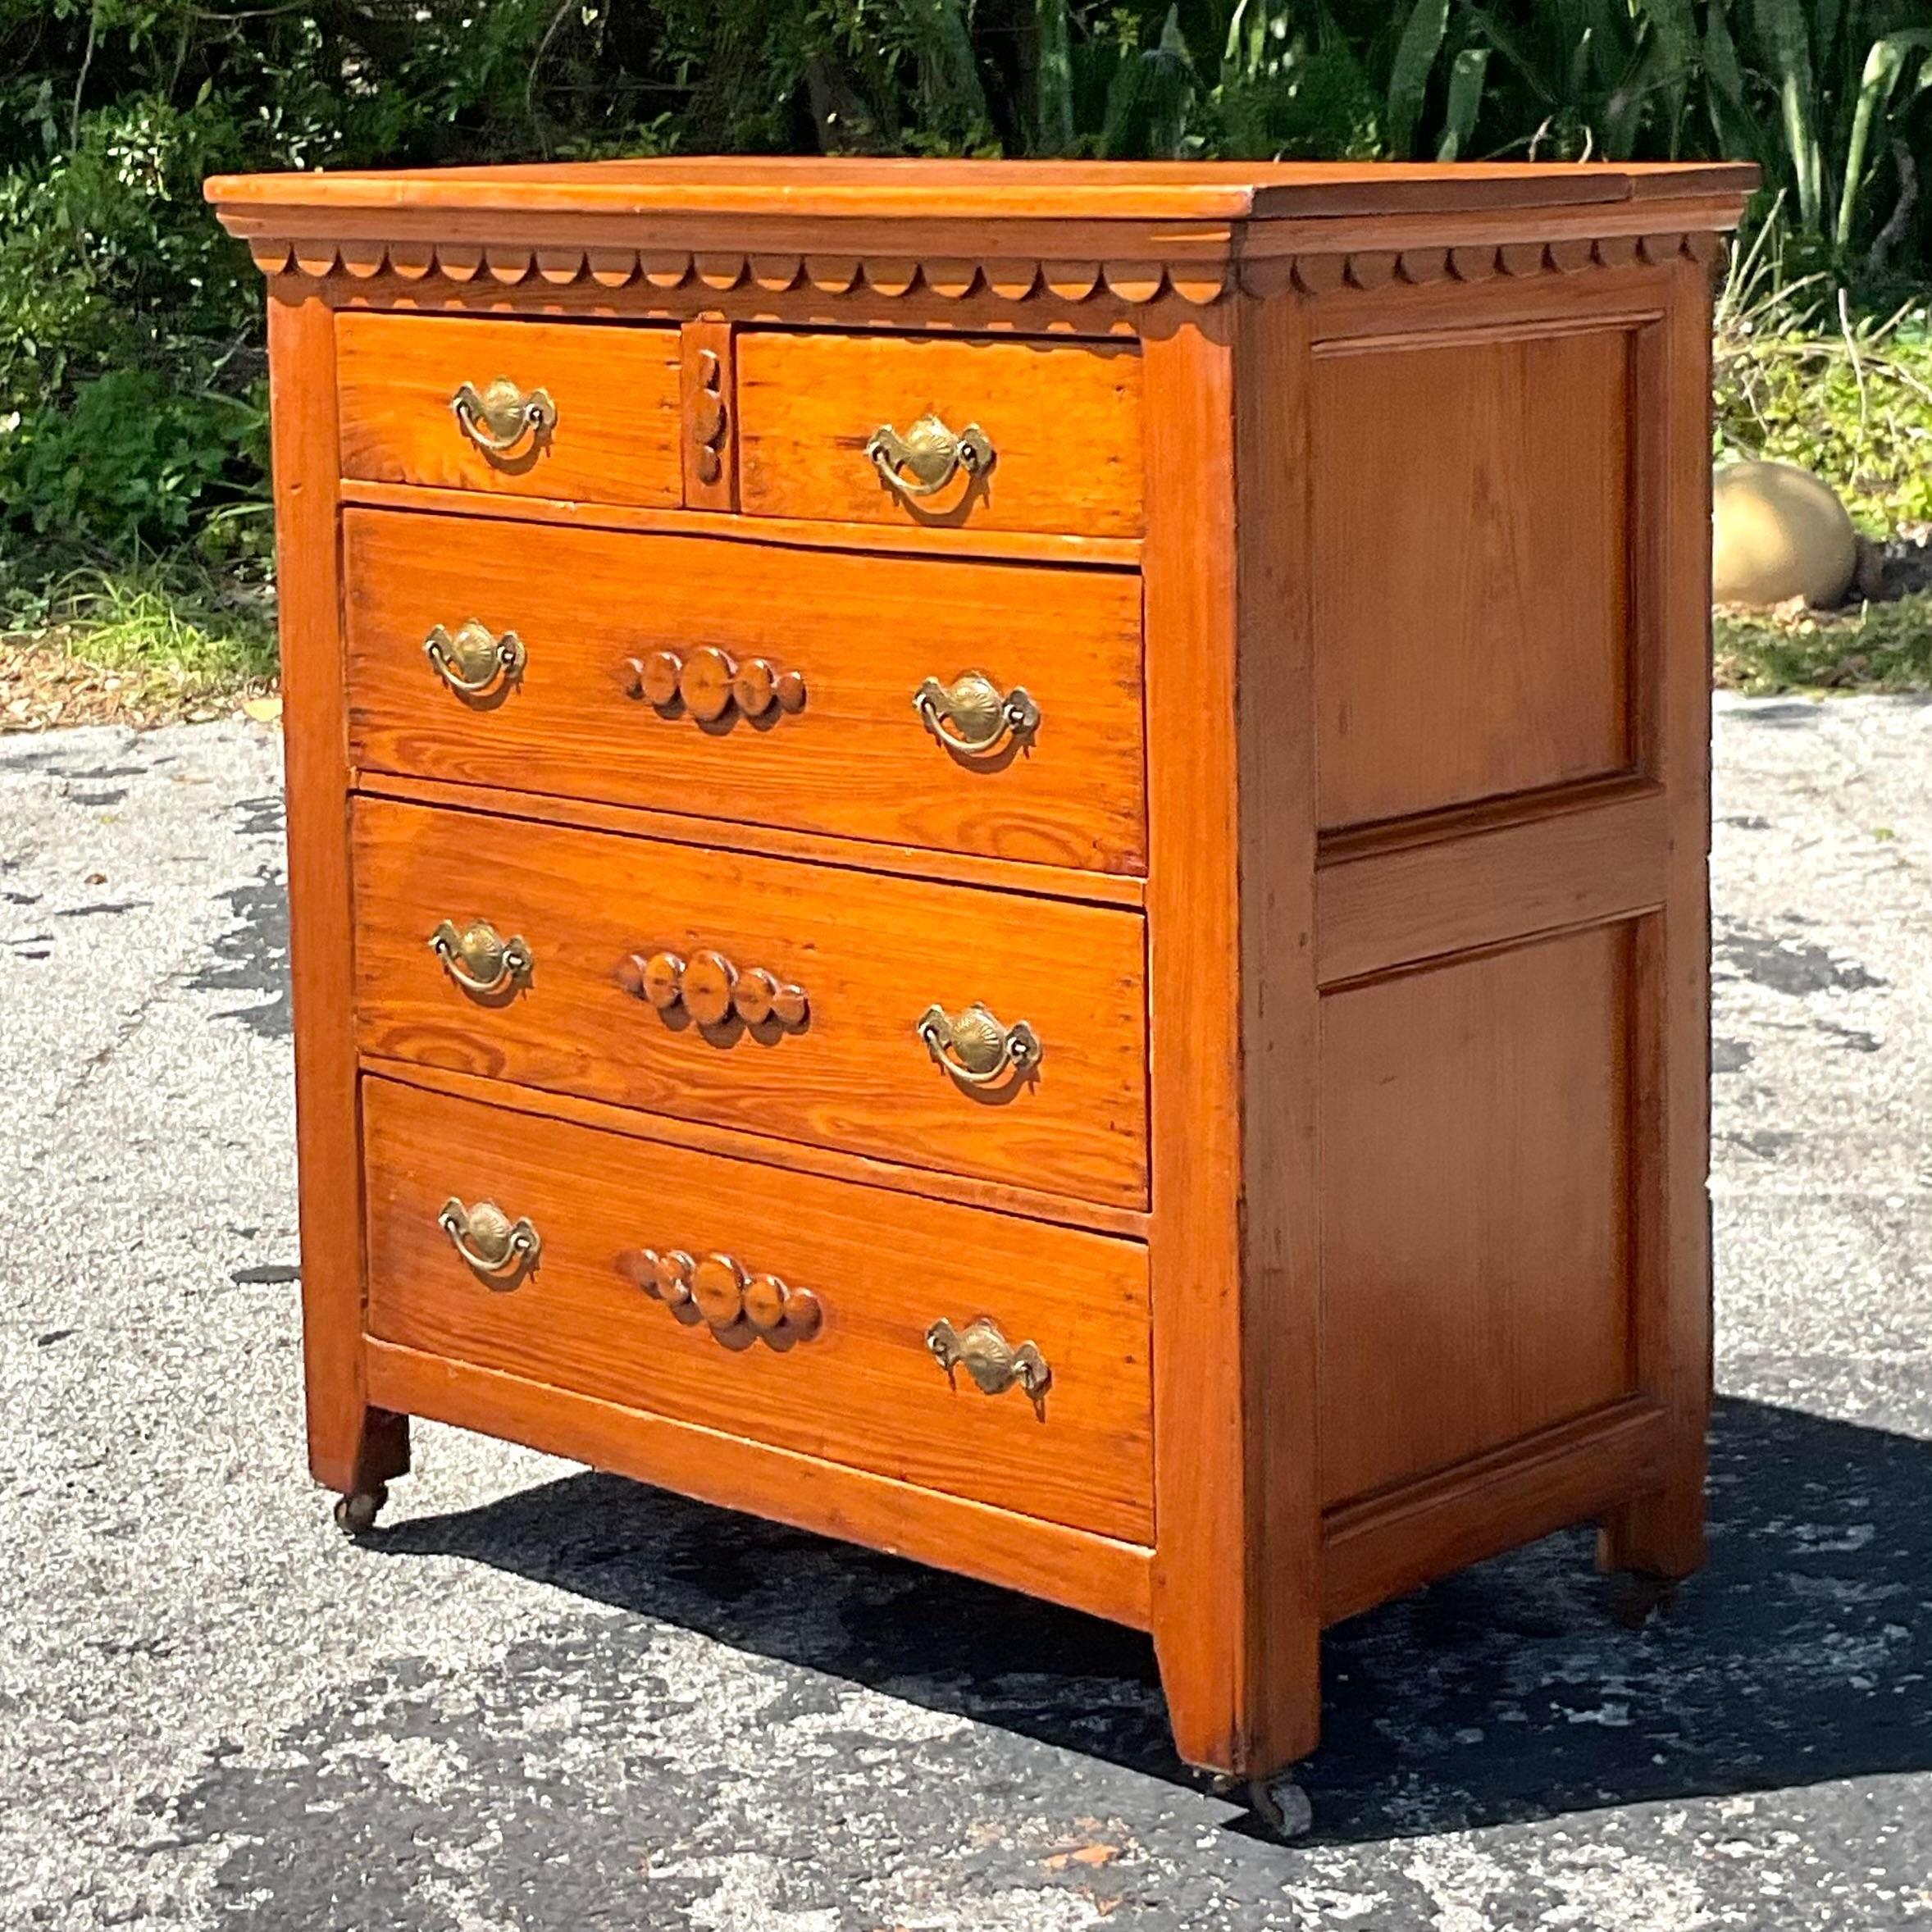 Embrace eclectic charm with this Vintage Boho Scalloped Chest and Drawers, reflecting the free-spirited essence of American bohemian style. Its scalloped design exudes whimsical elegance, while the meticulous craftsmanship adds a touch of timeless